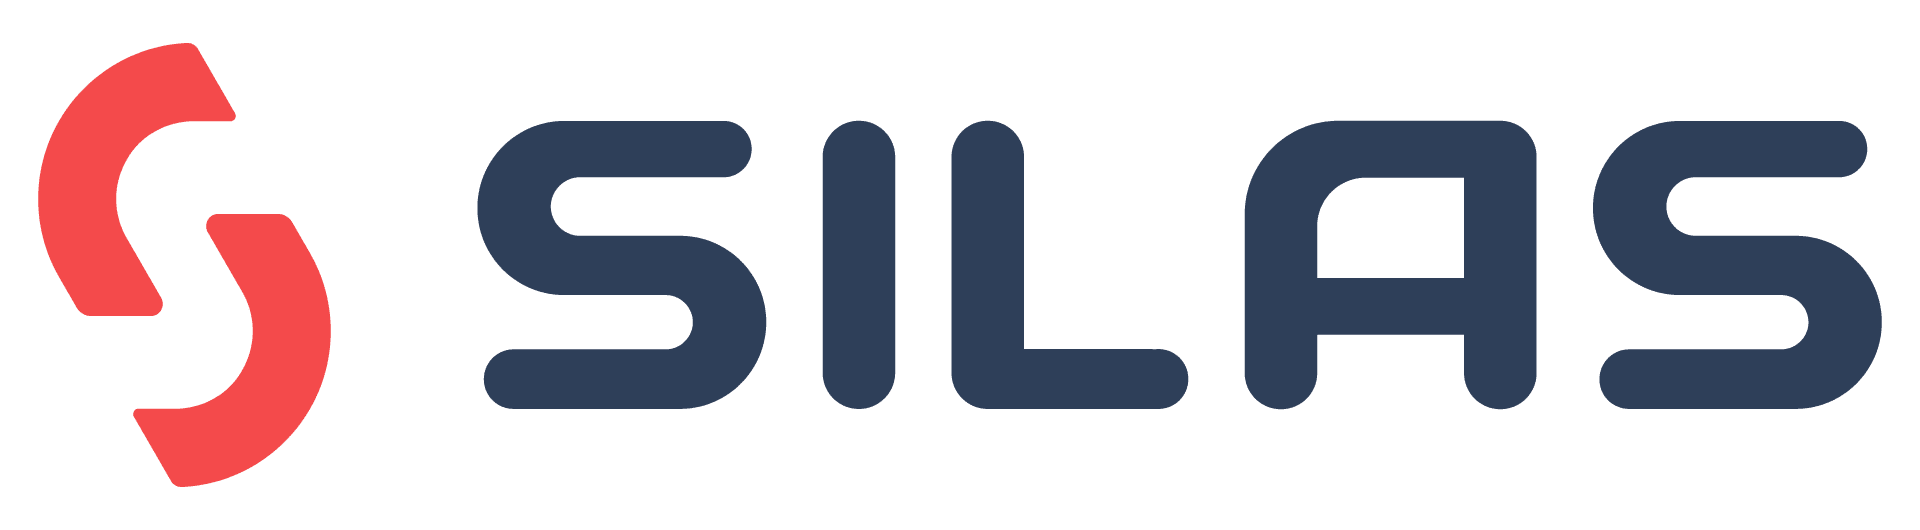 CentralReach Acquires Social-Emotional Learning Provider SILAS to Expand Education Suite